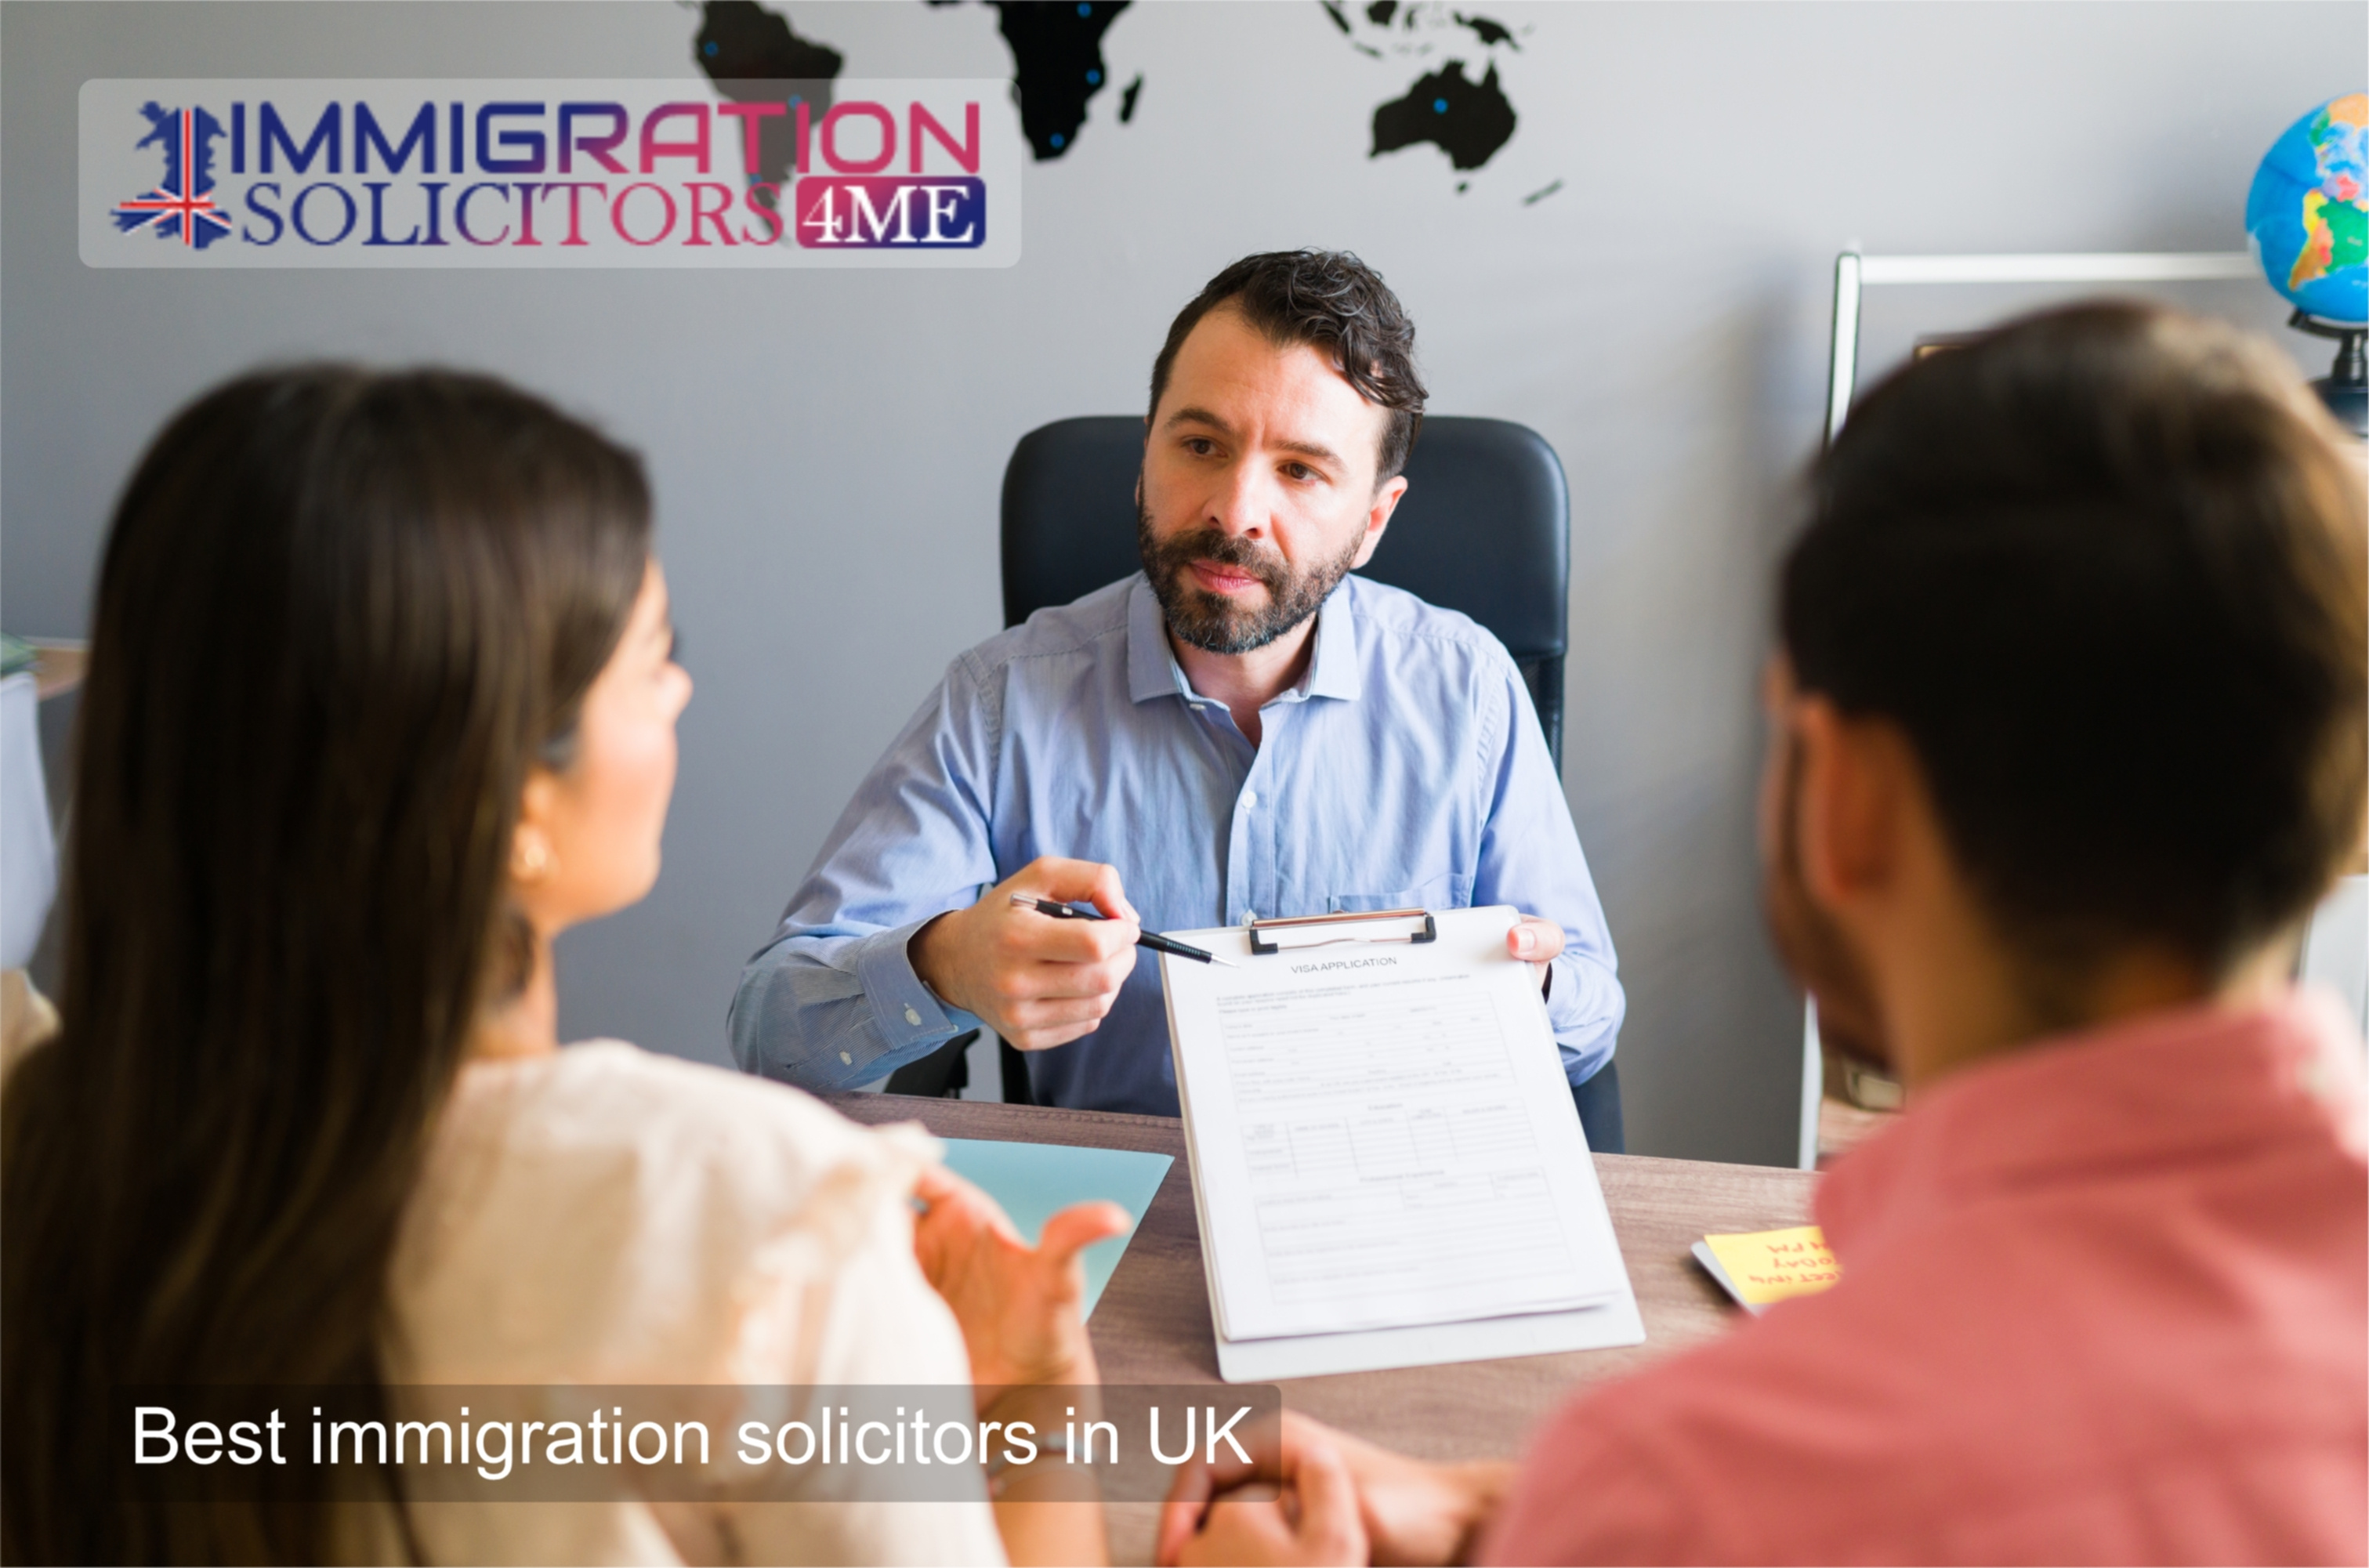 uk immigration solicitors by immigrationlawyerinUK on Dribbble